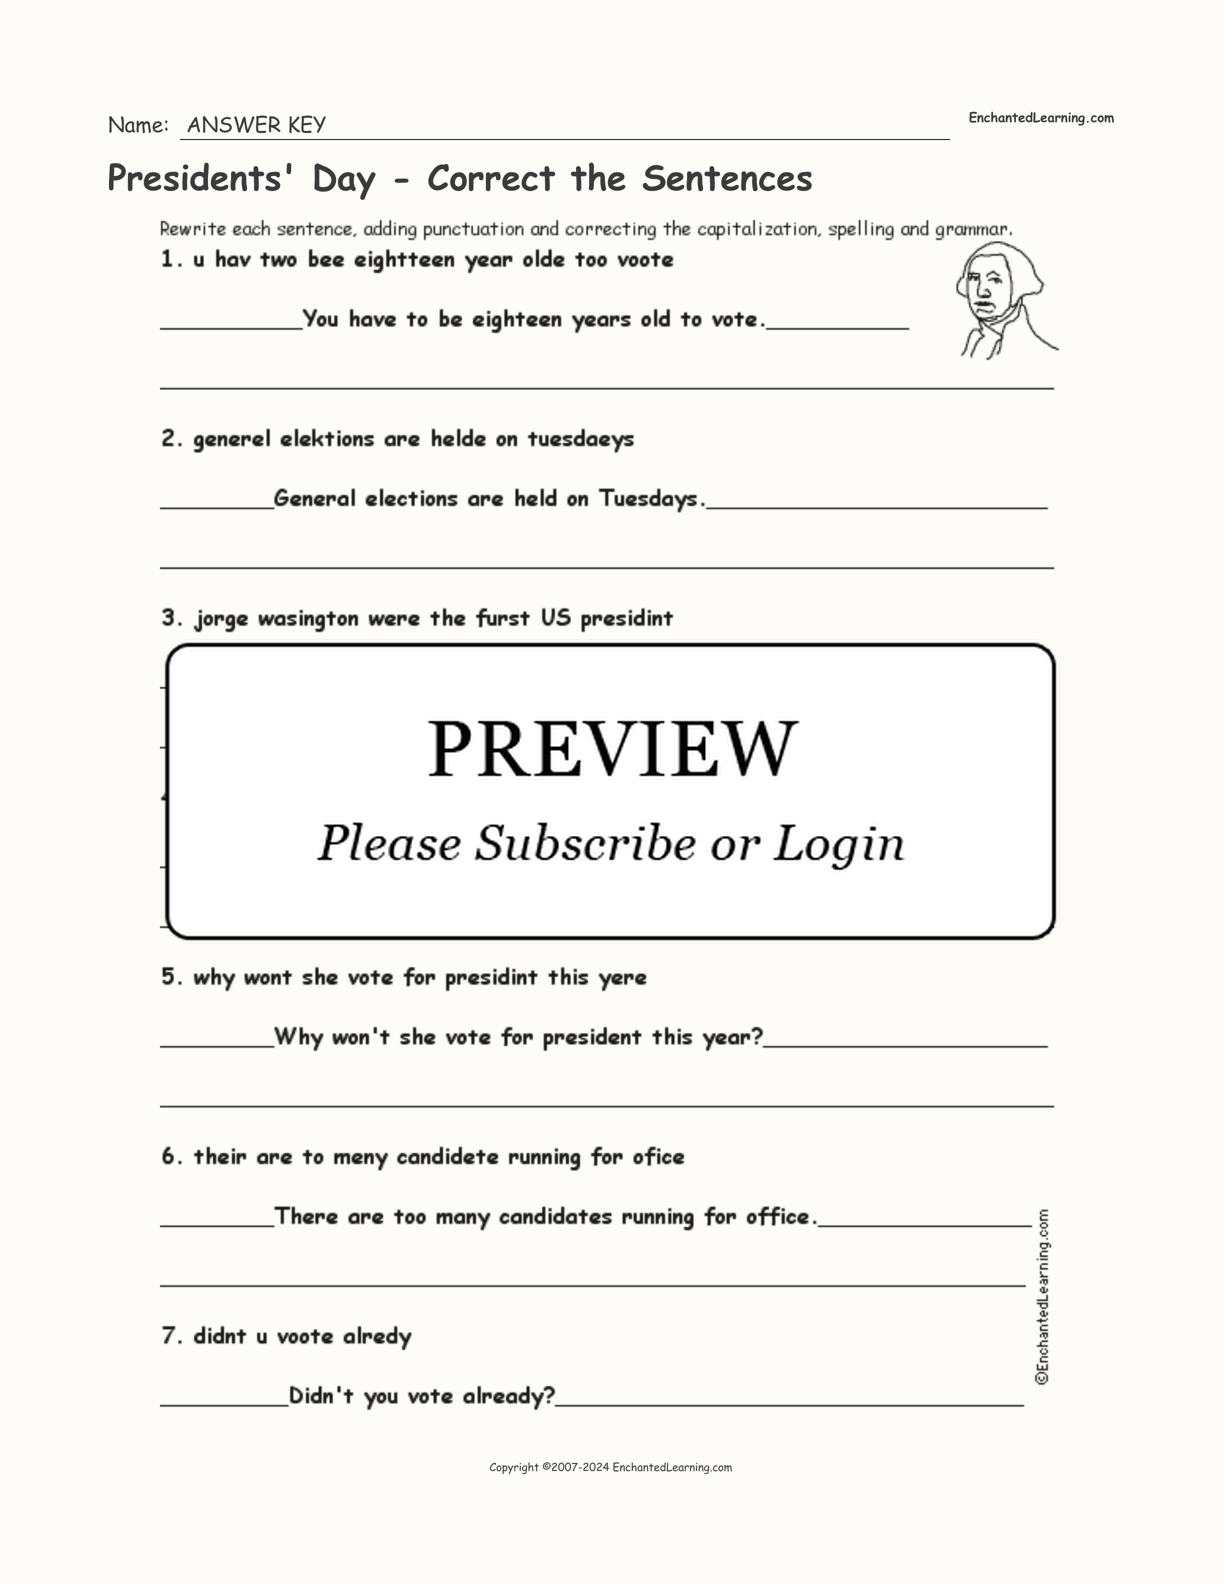 Presidents' Day - Correct the Sentences interactive worksheet page 2